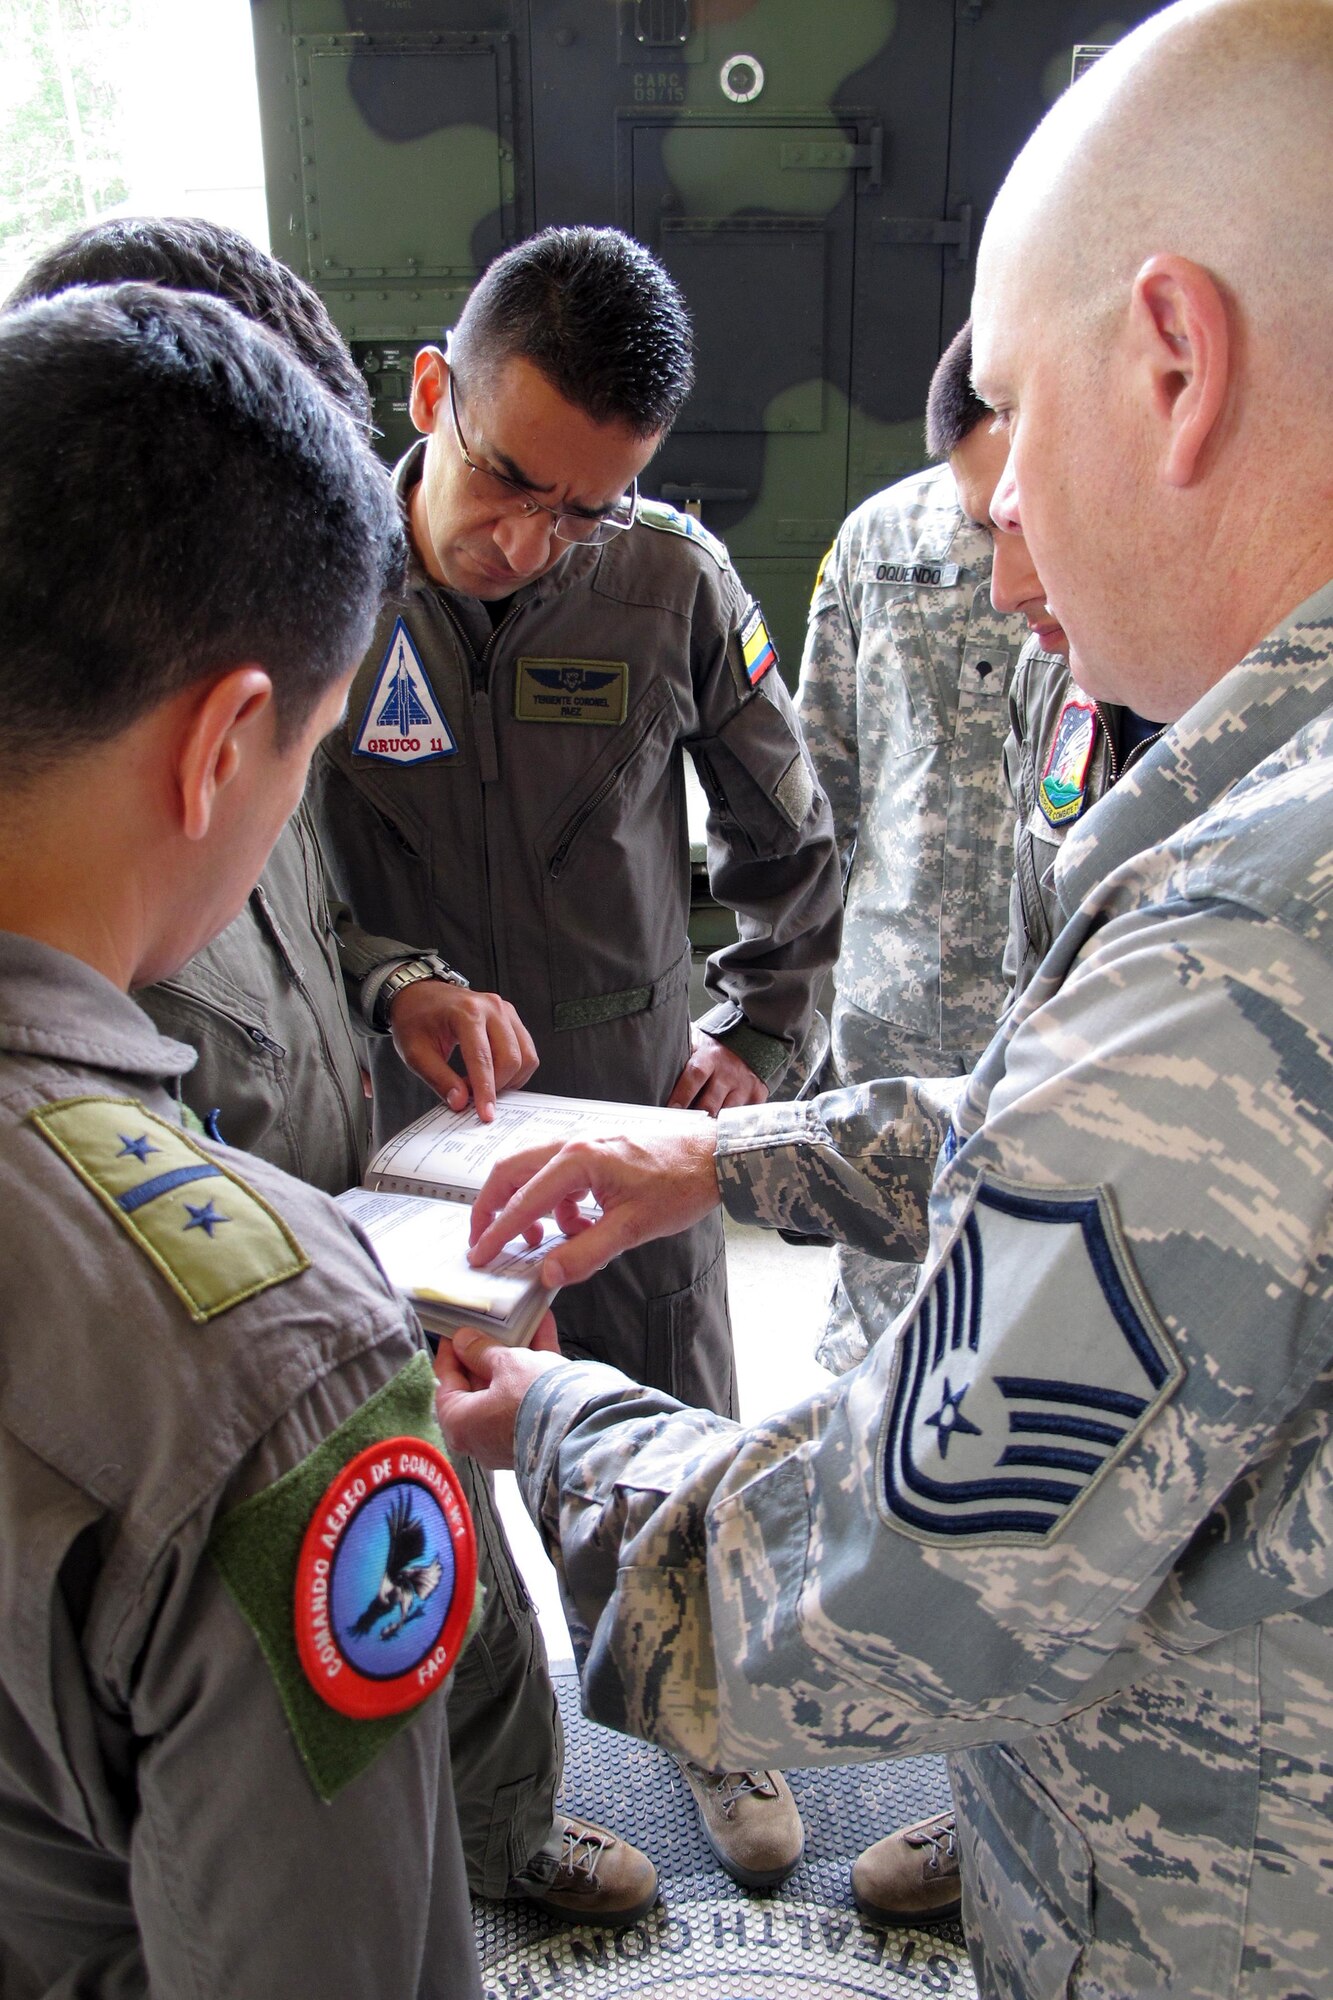 Members of the Colombian Air Force discuss training plans for U.S. Air Force Controllers during a visit with the Georgia Air National Guard’s 117th Air Control Squadron at Hunter Army Airfield in Savannah, Georgia during a State Partnership Program Subject Matter Expert Exchange on Ground Control Intercept, May 30-June 2, 2017. During the weeklong engagement the Colombians worked with Air Controllers from 117th shaping Colombian Air Force training plans by pairing experts together to exchange ideas. The Georgia Air National Guard supported the South Carolina National Guard’s State Partnership Program during the engagement. (U.S. Air National Guard photo by Capt. Stephen D. Hudson)